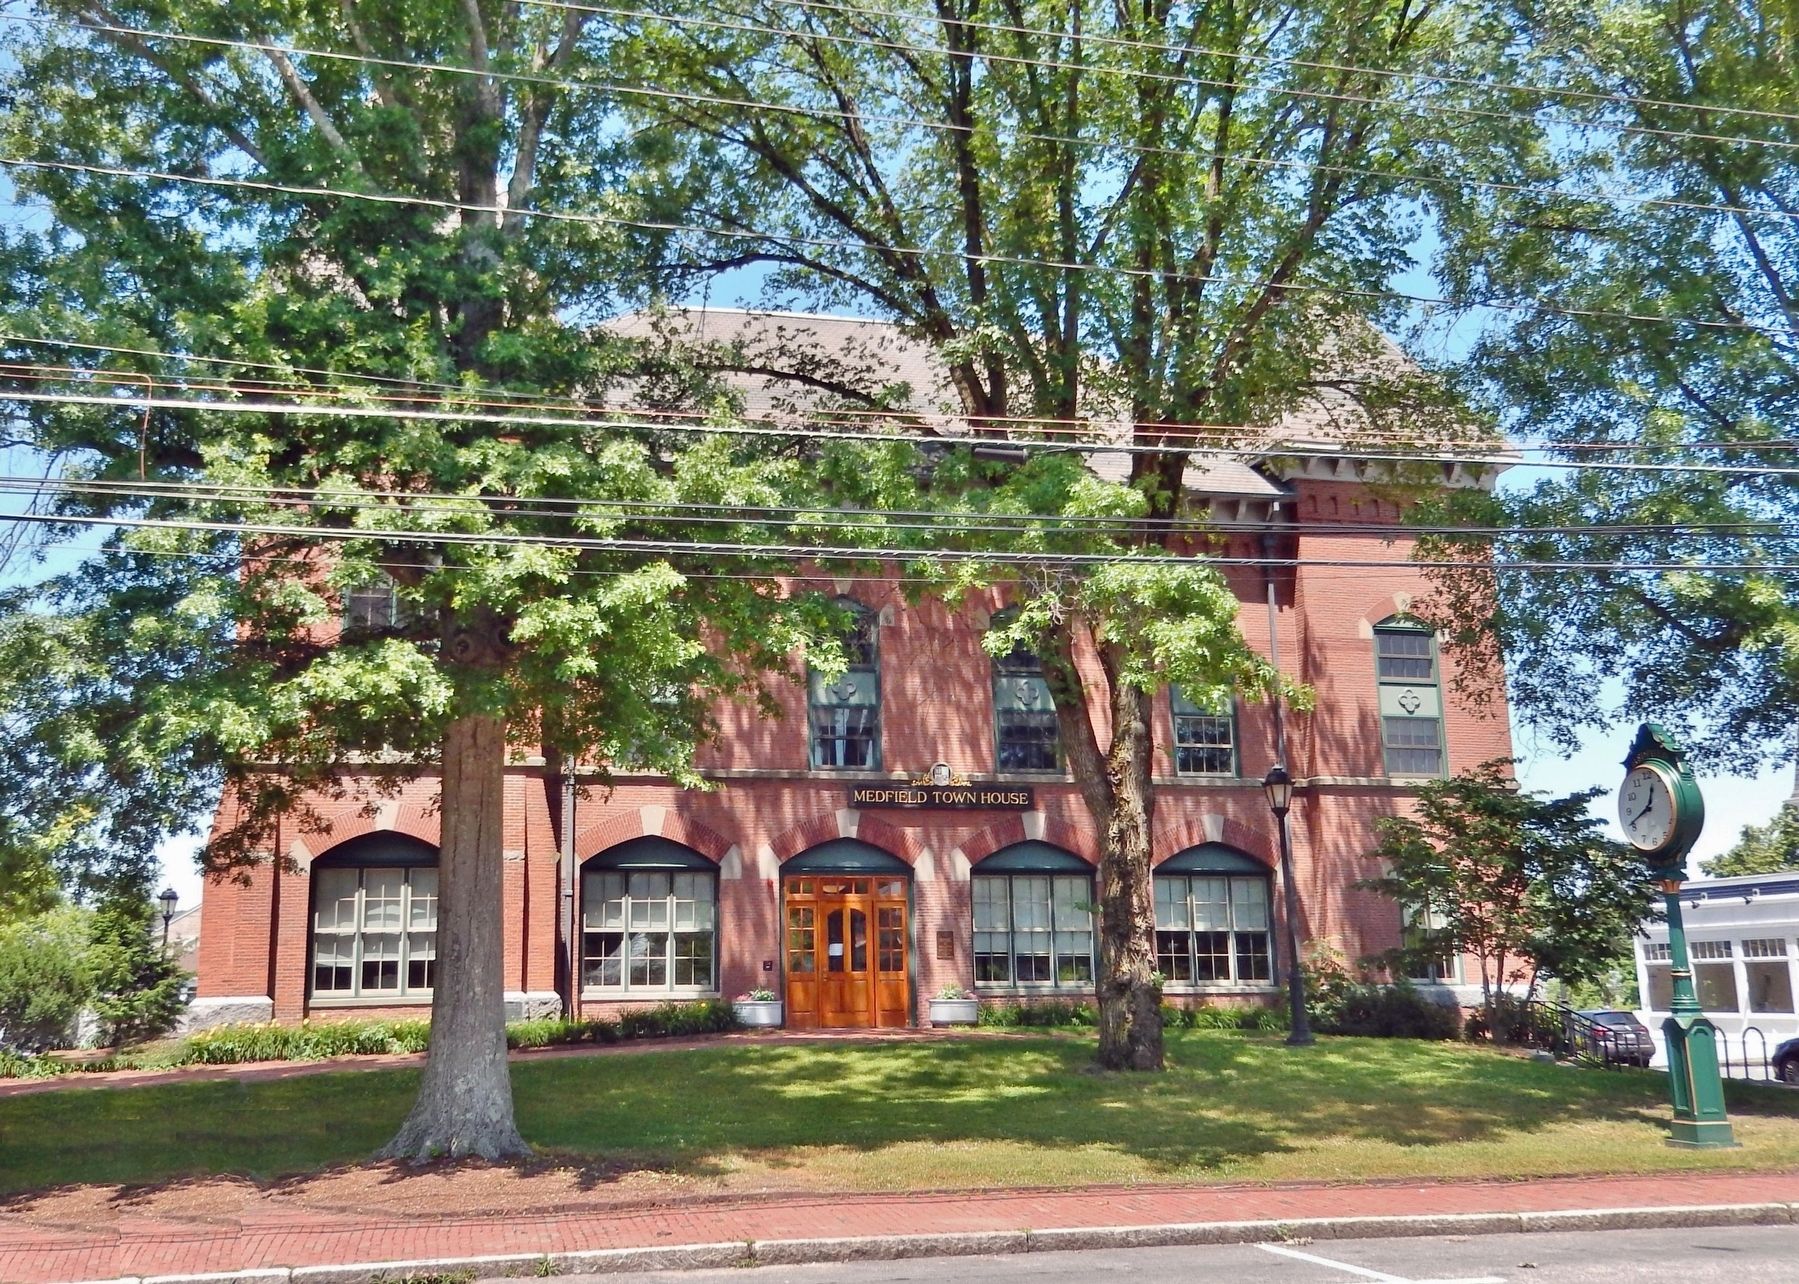 Medfield Town Hall (<i>south/front elevation</i>) image. Click for full size.